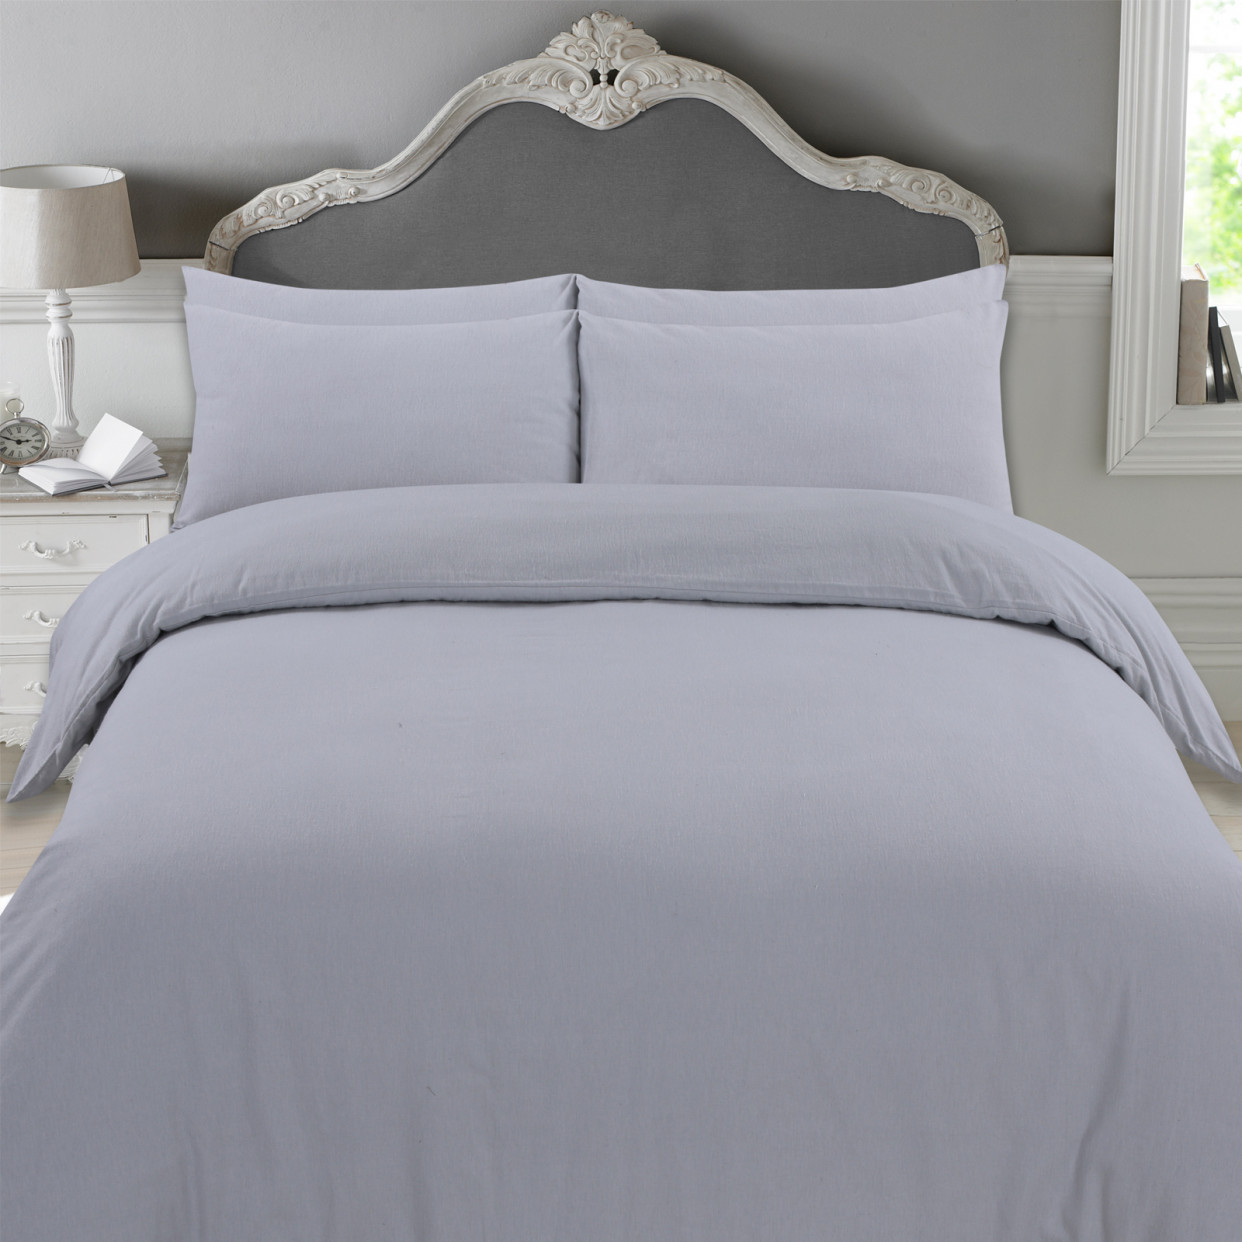 Highams 100% Brushed Cotton Duvet Cover with Pillowcase Plain Flannelette Thermal Bedding Set, Grey Silver - King>